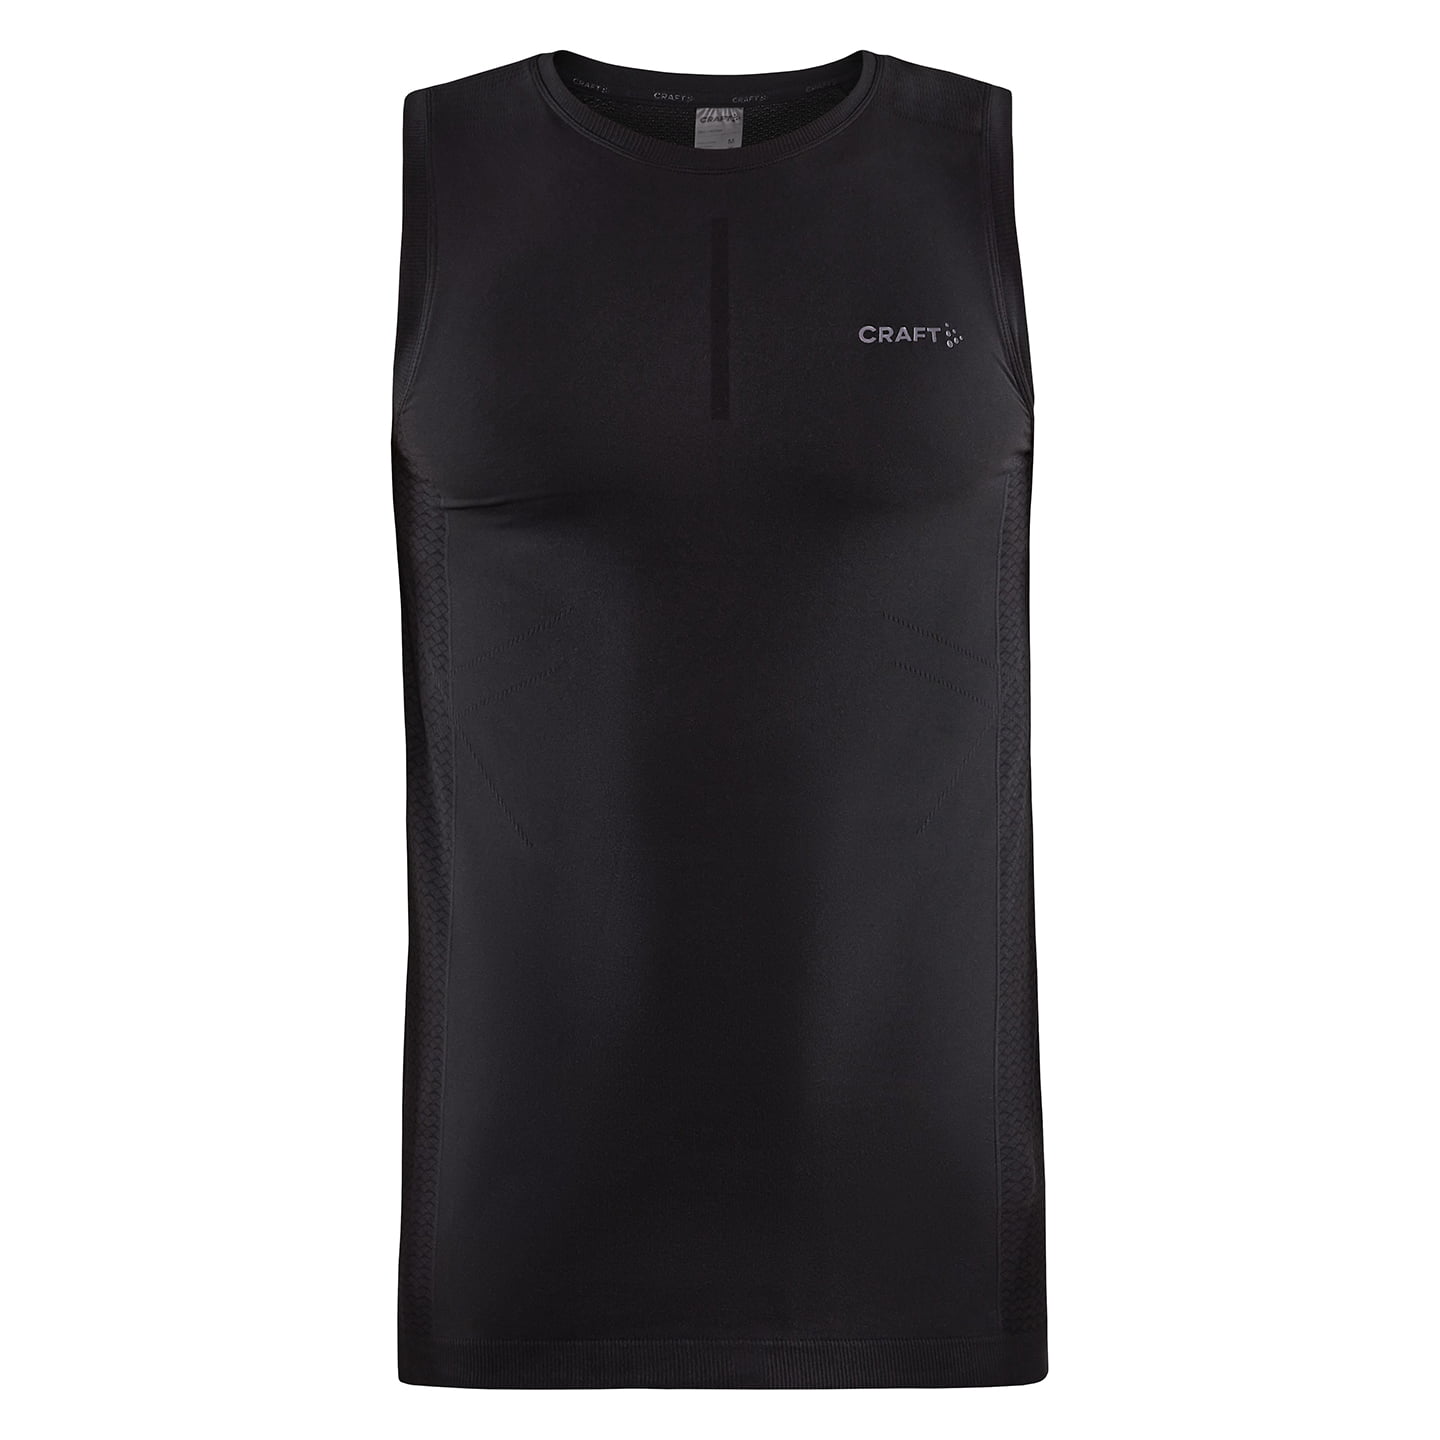 CRAFT Intensity Sleeveless Cycling Base Layer Base Layer, for men, size M